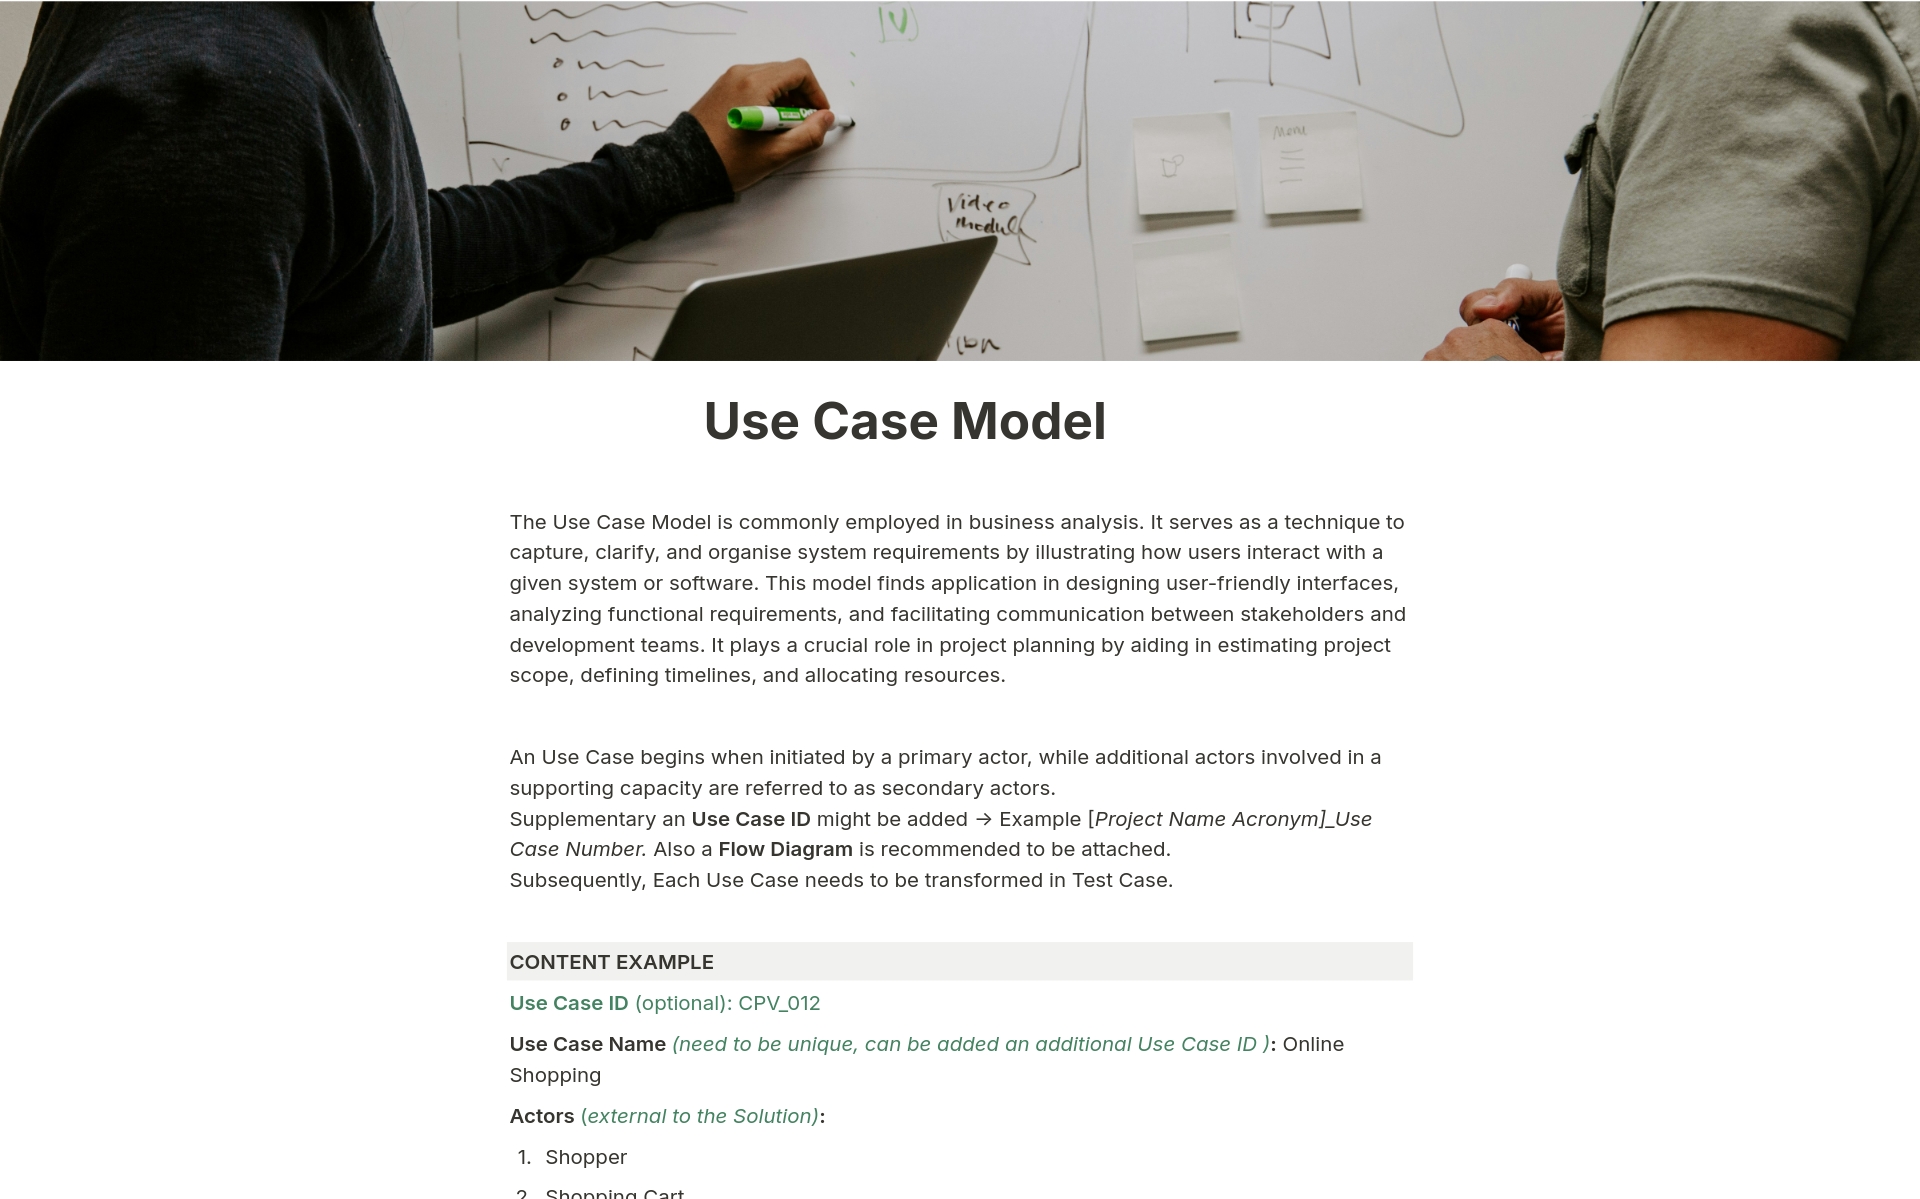 This is a standardised template of use cases which is useful in all business industries, based on BABOK.